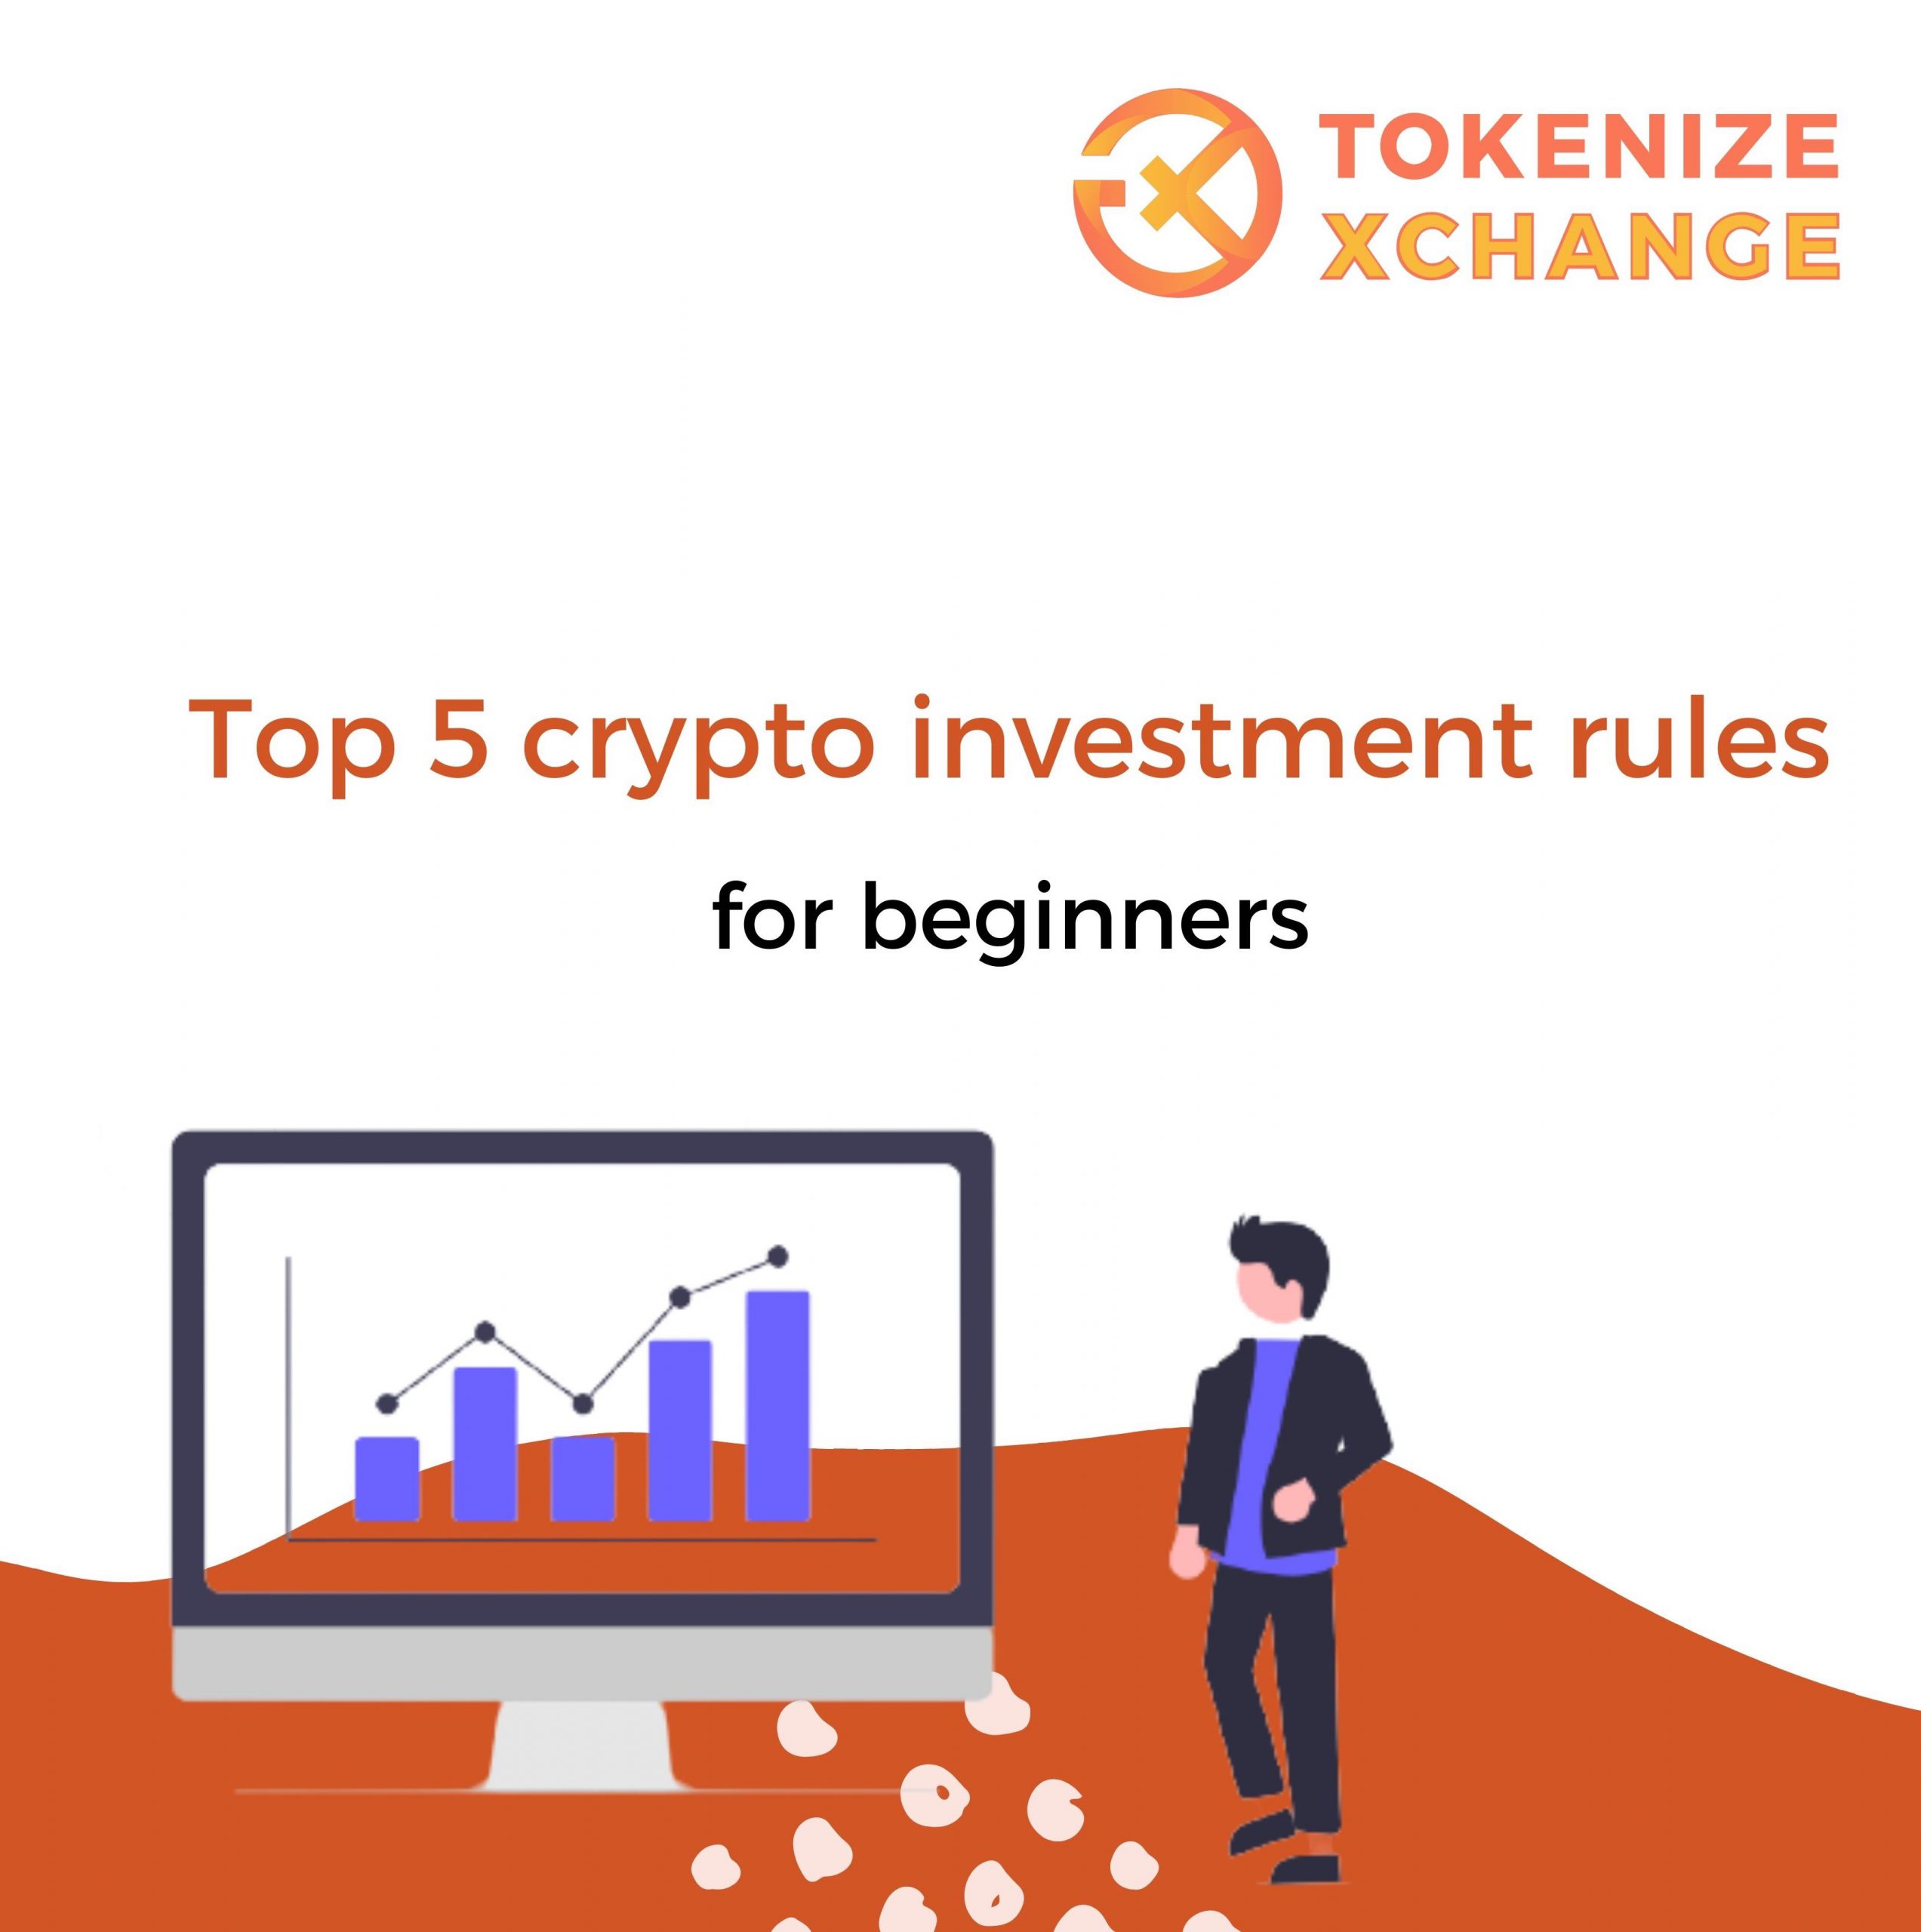 How to invest in crypto: Top 5 crypto investment rules for beginners